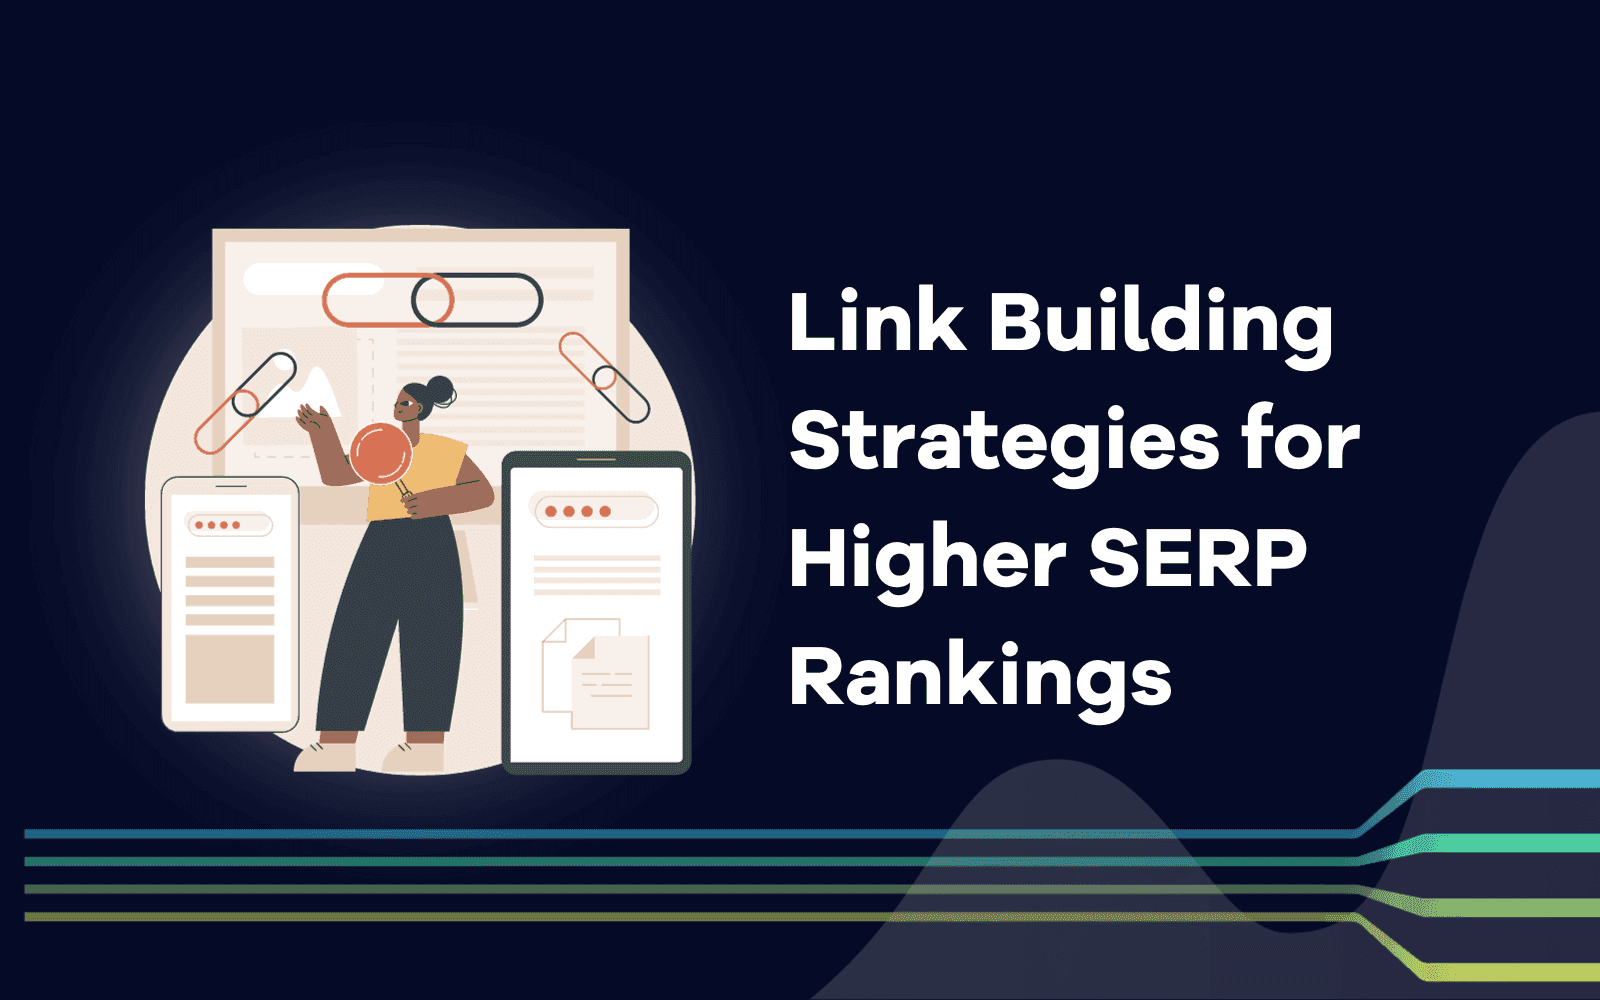 Hot or Not? 7 New Link Building Strategies for Higher SERP Rankings